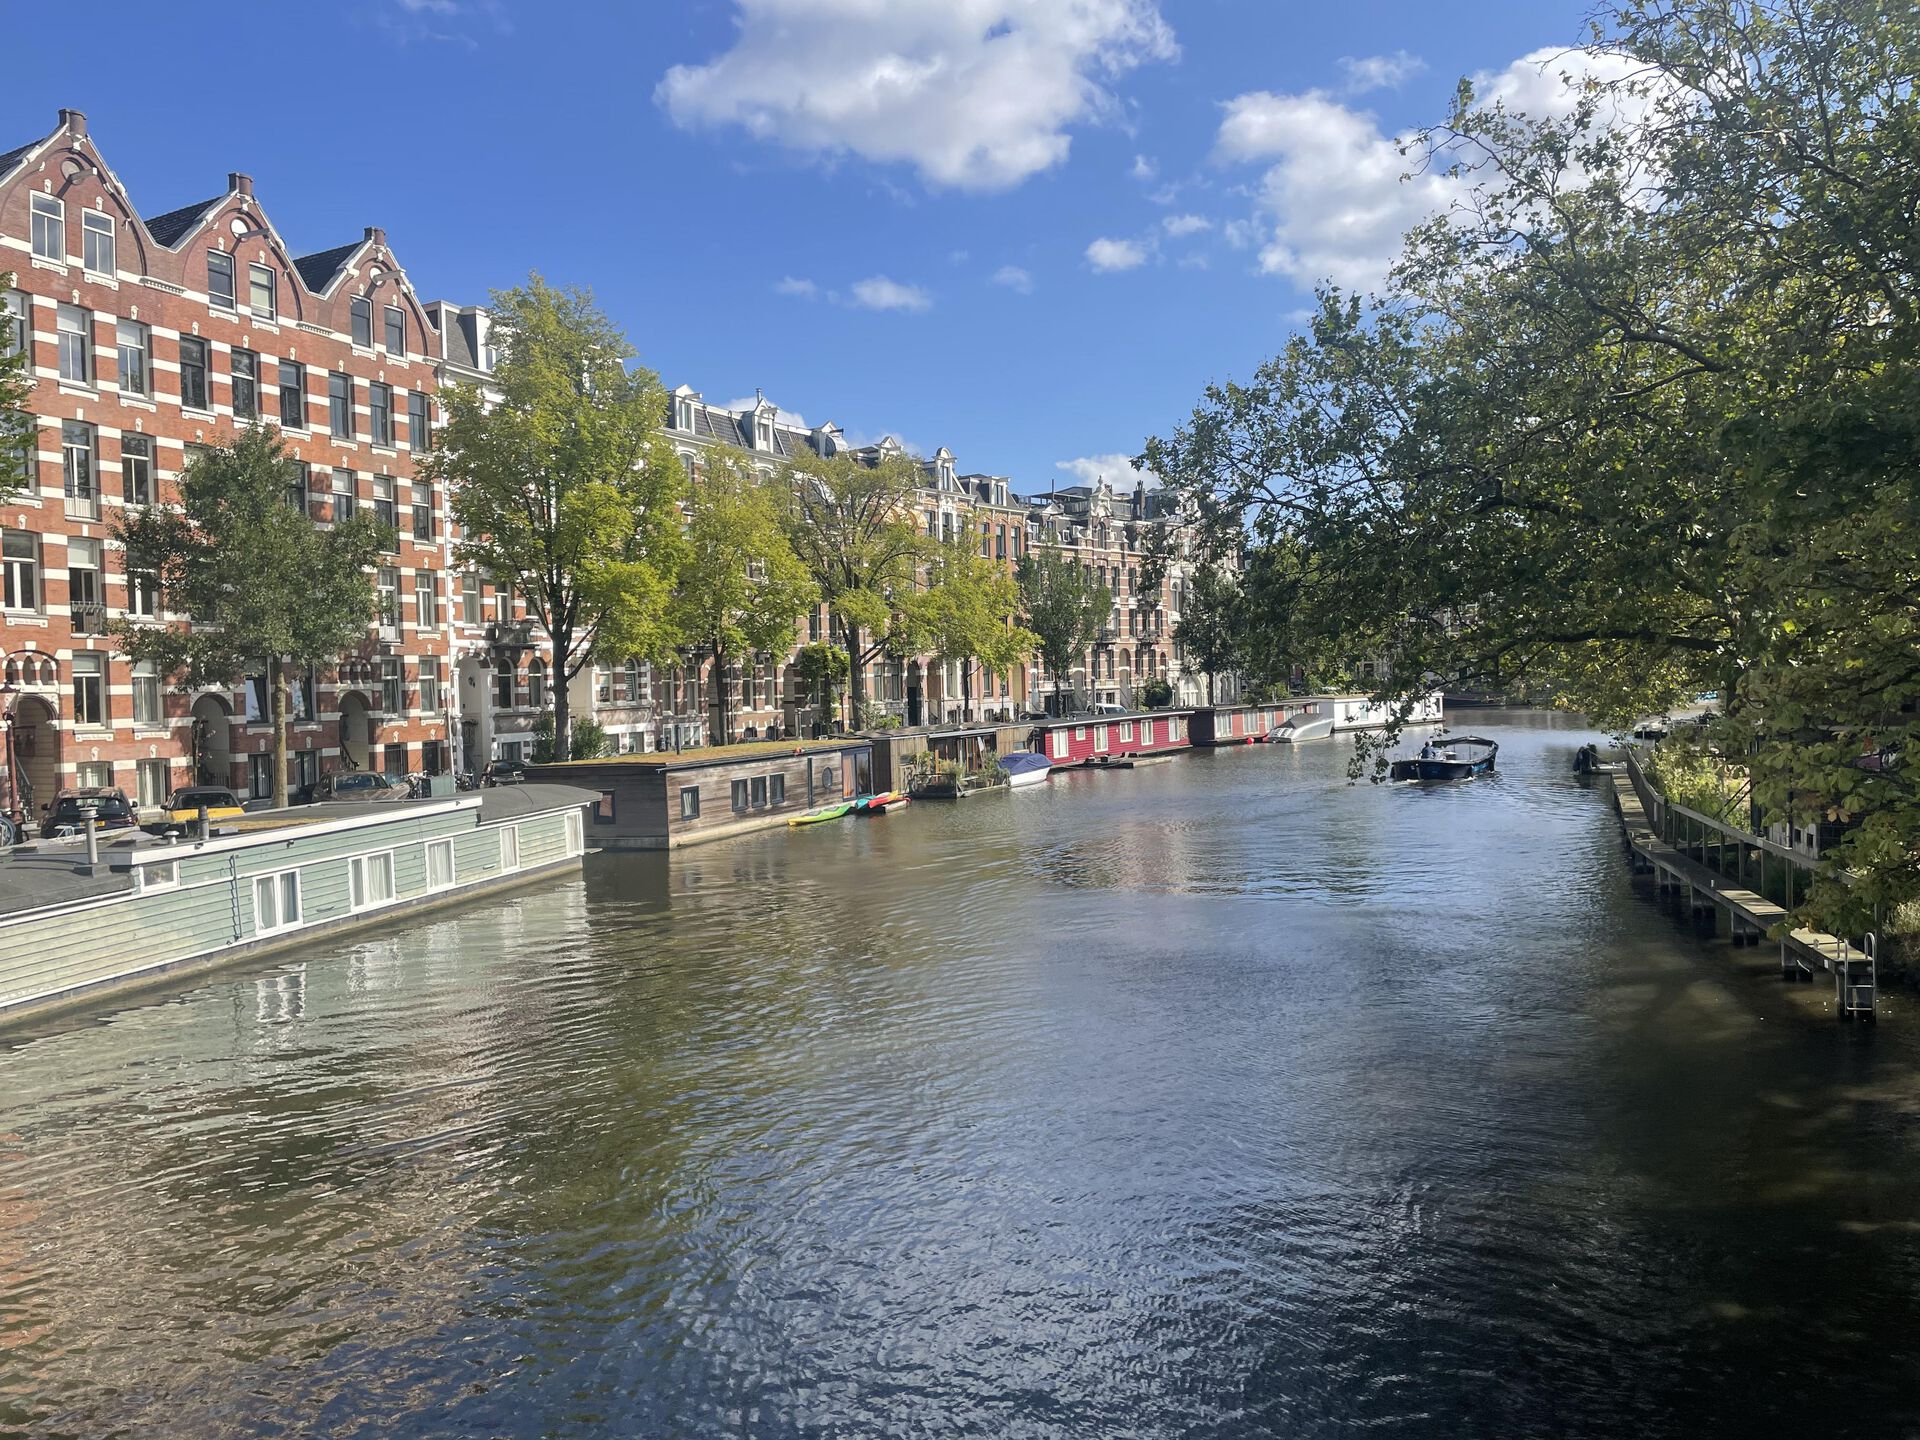 University of Amsterdam campus along the river